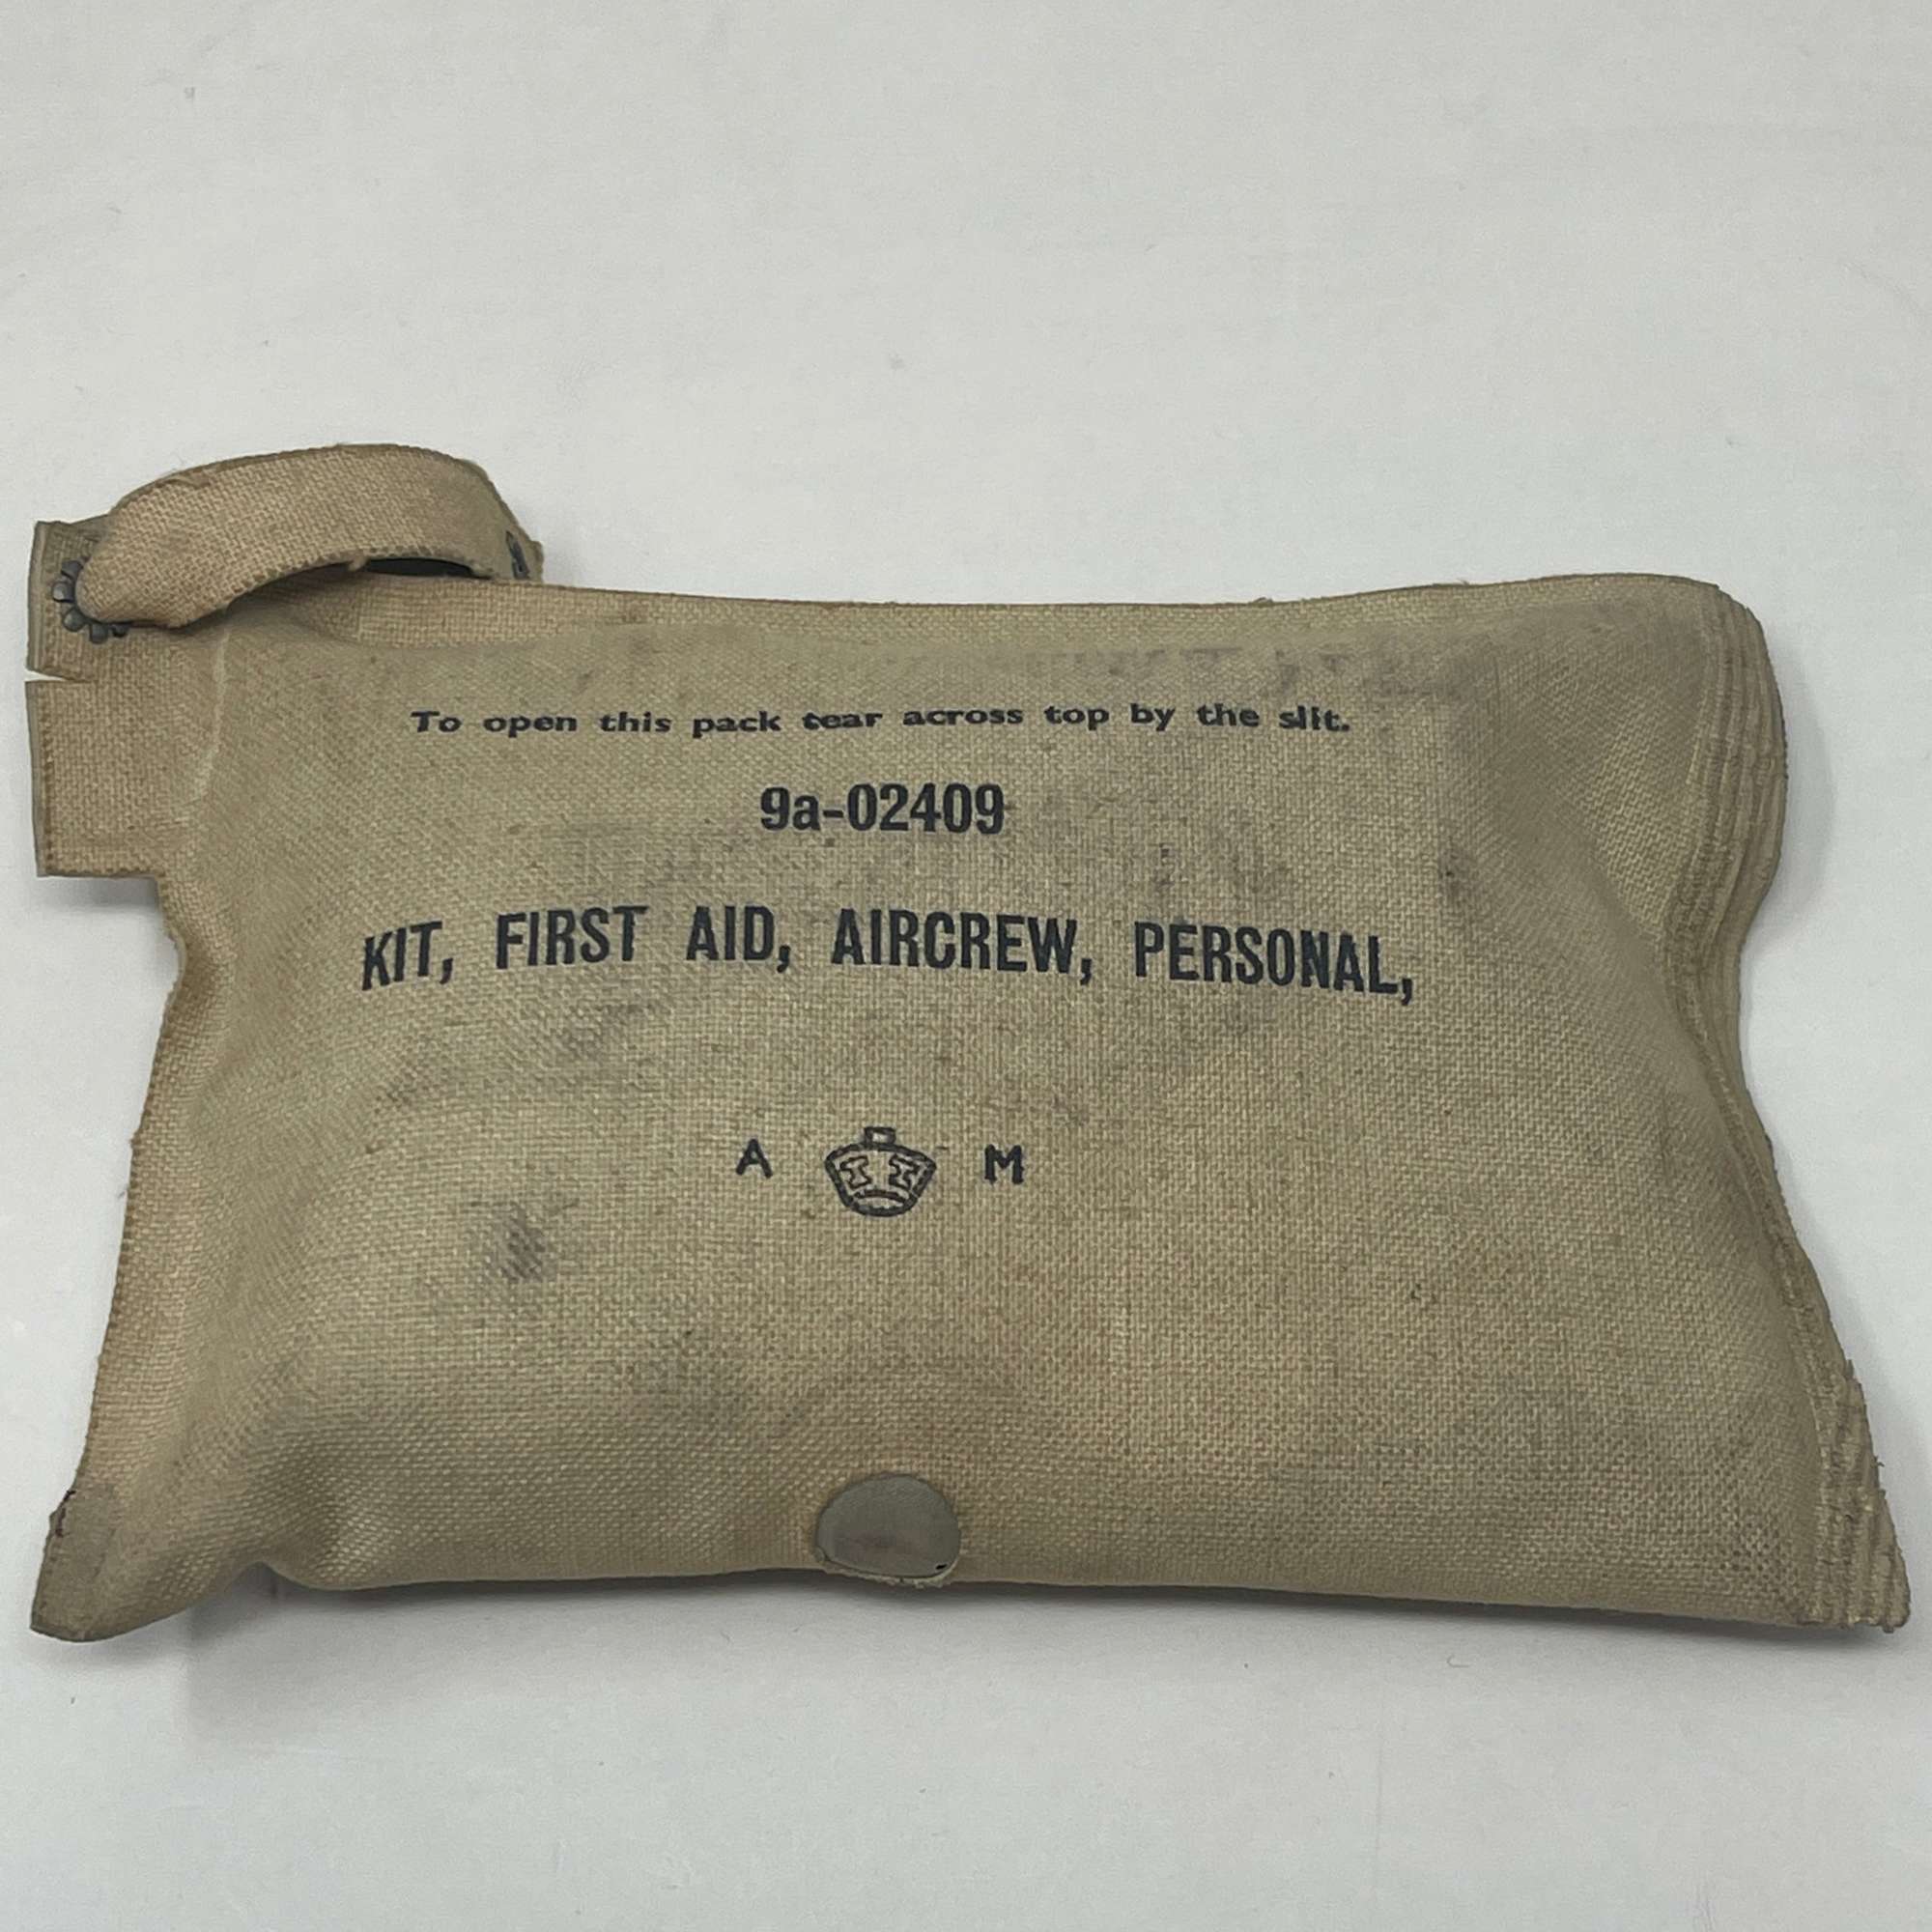 RAF First-Aid, Aircrew, Personal. Stores ref. 9a-02409.